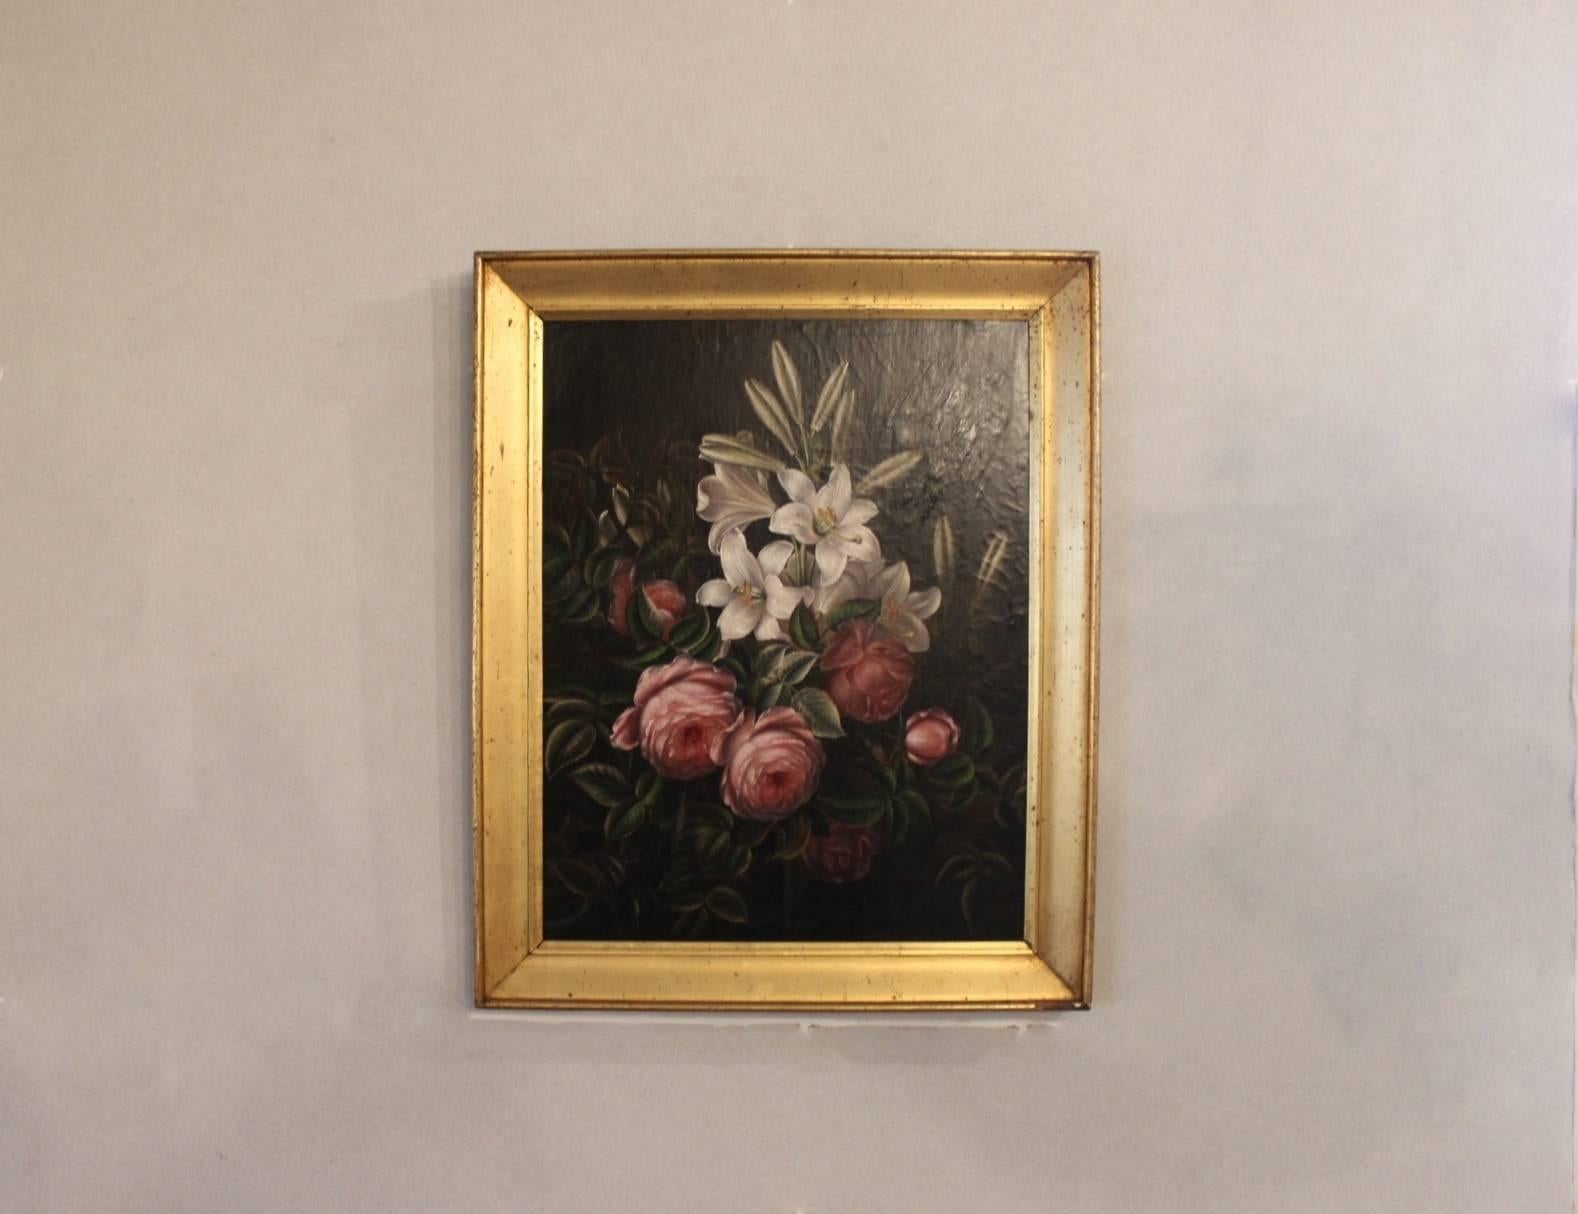 Beautiful oil painting of pink peonies and White lilies on a dark background by a student of the I.L. Jensen School, which was taught by the famous Danish painter I.L. Jensen. The painting comes with a golden antique frame and is from 1880.